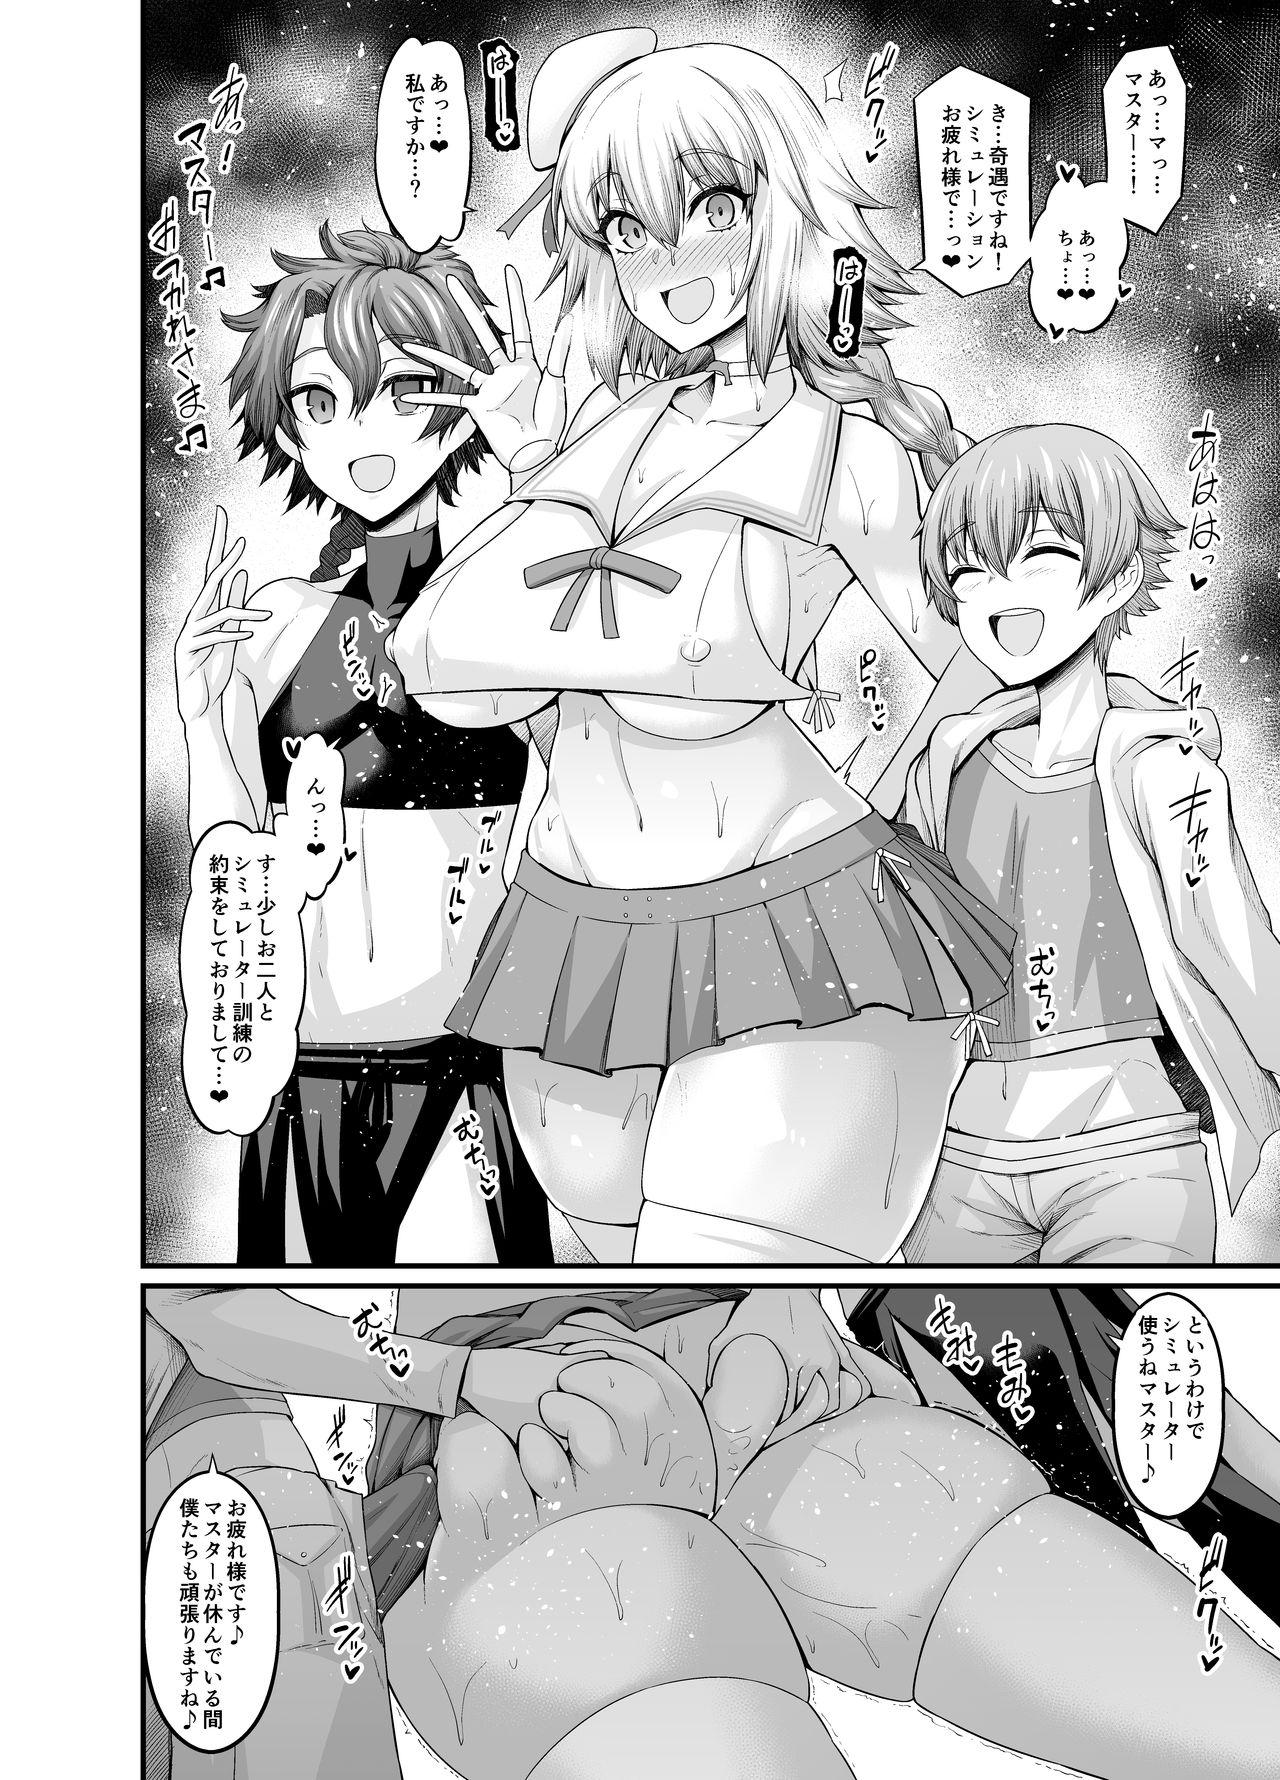 Mediumtits Jeanne to Issho ni Training - Fate grand order Creamy - Page 1